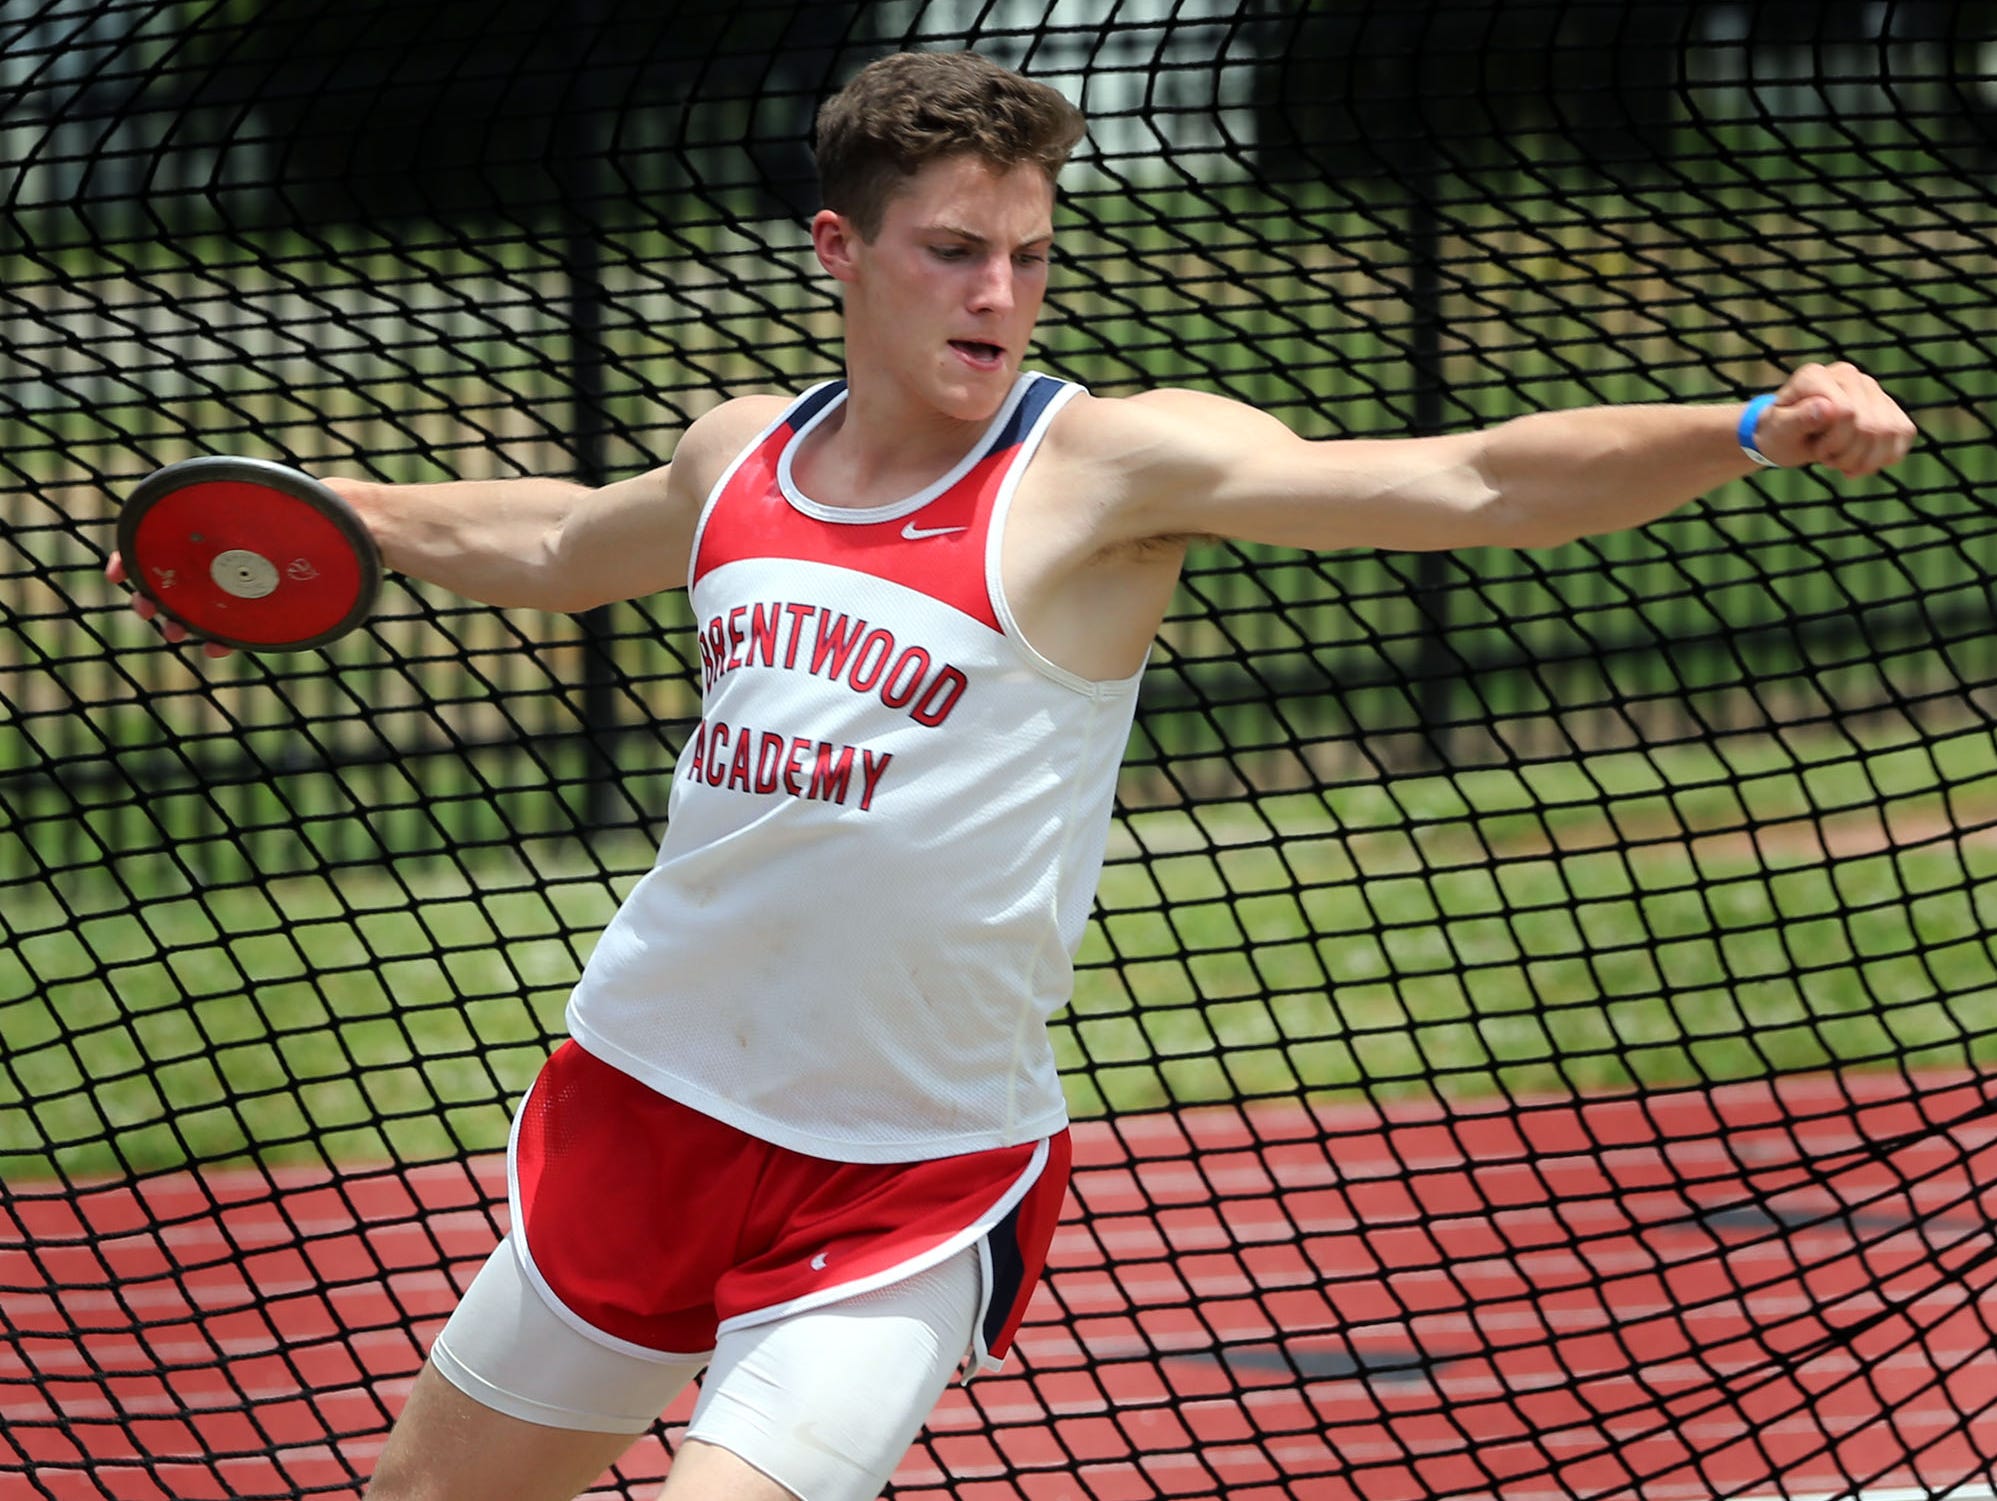 Brentwood Academy's George Patrick will look to defend his DII decathlon title this week in Murfreesboro.